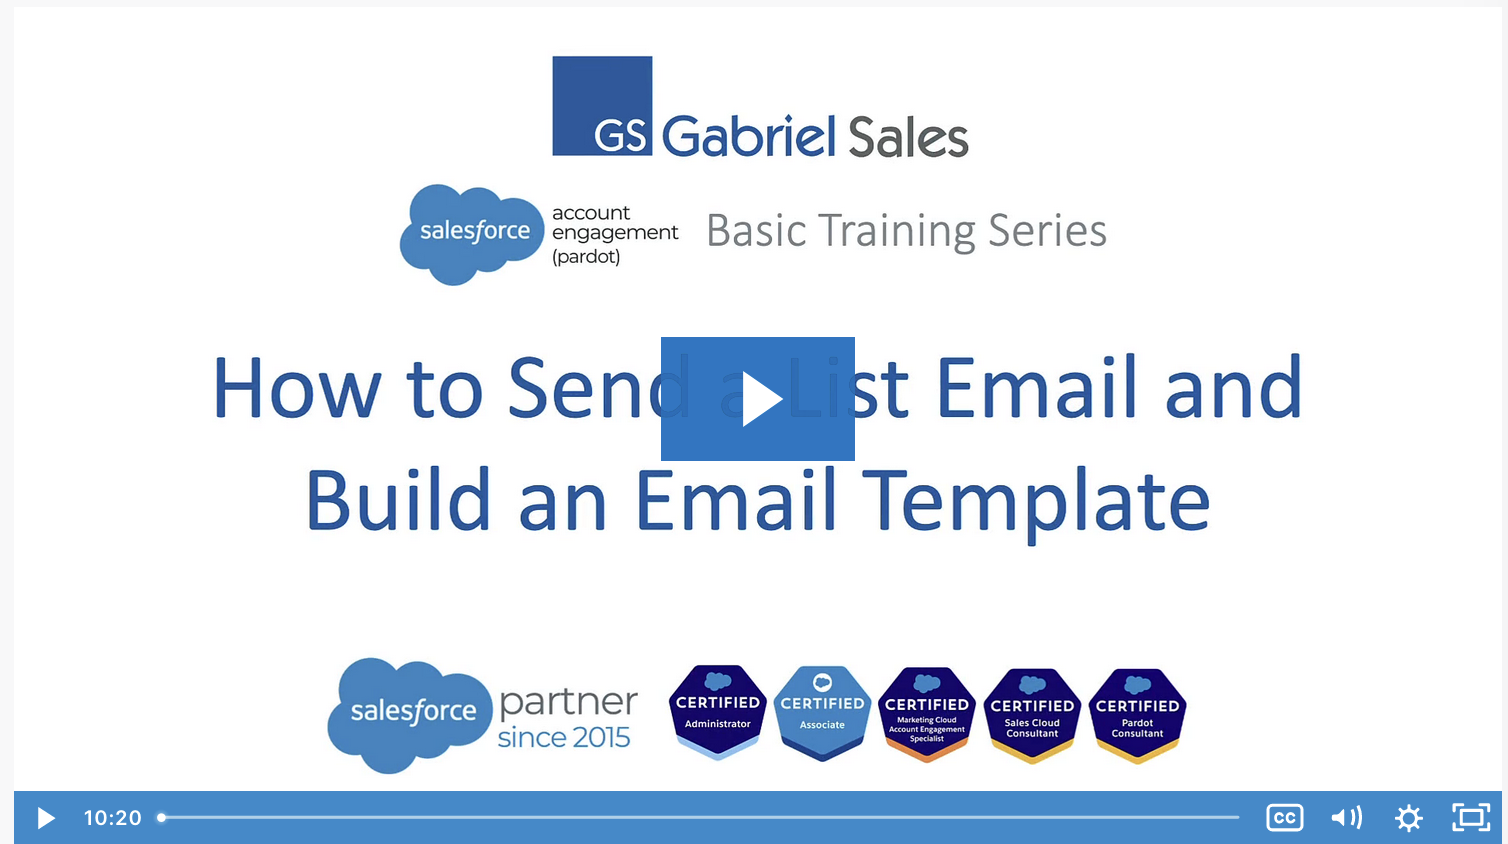 How to Build and Send an Email with Salesforce Account Engagement (Pardot) – Sales Tech Tutorial